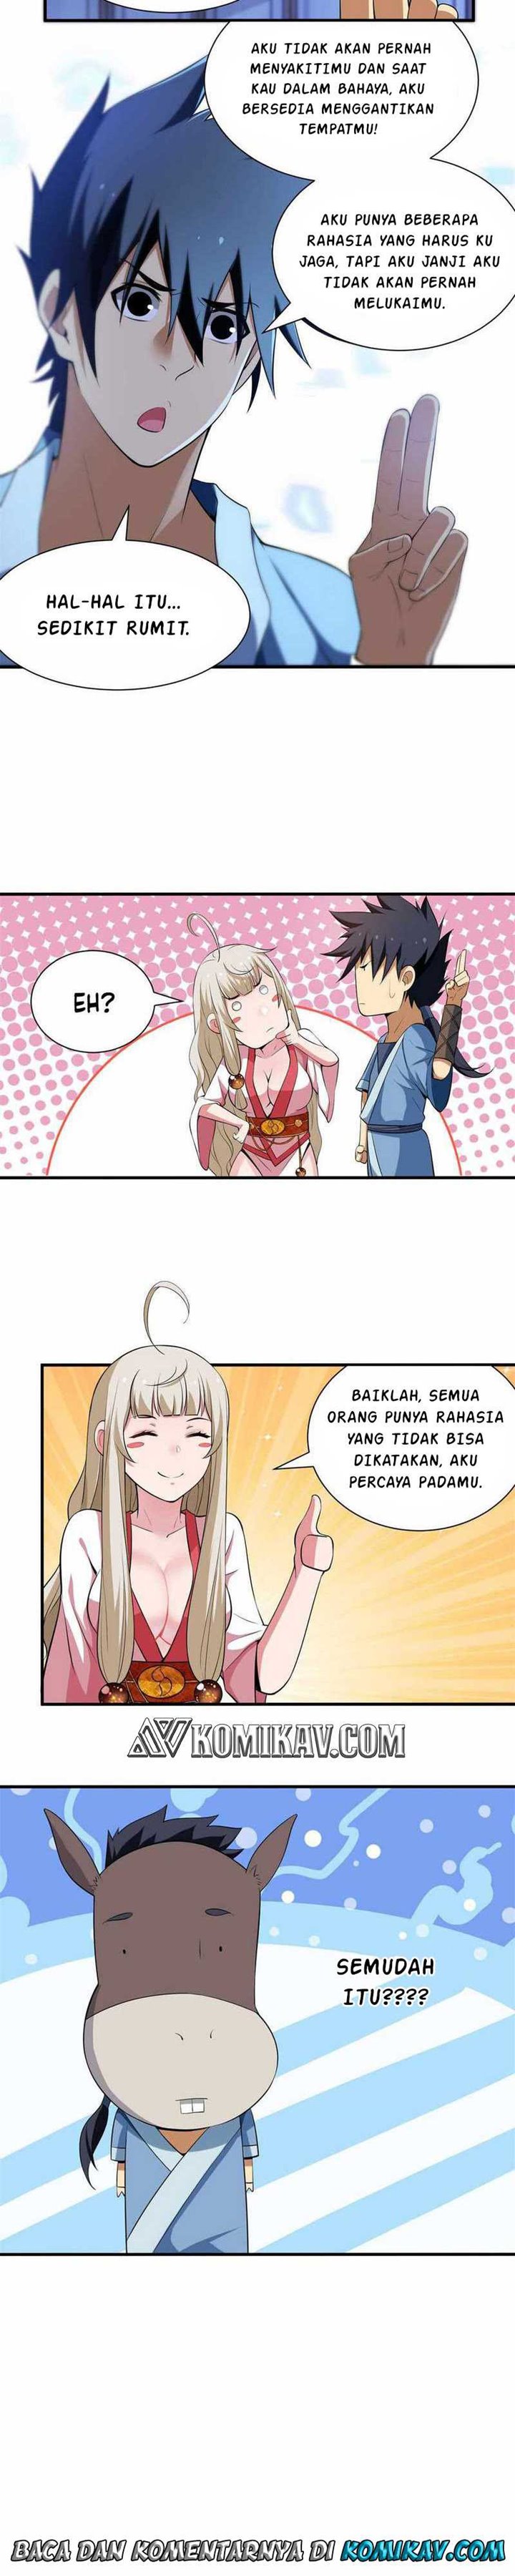 Dilarang COPAS - situs resmi www.mangacanblog.com - Komik i just want to be beaten to death by everyone 015 - chapter 15 16 Indonesia i just want to be beaten to death by everyone 015 - chapter 15 Terbaru 9|Baca Manga Komik Indonesia|Mangacan